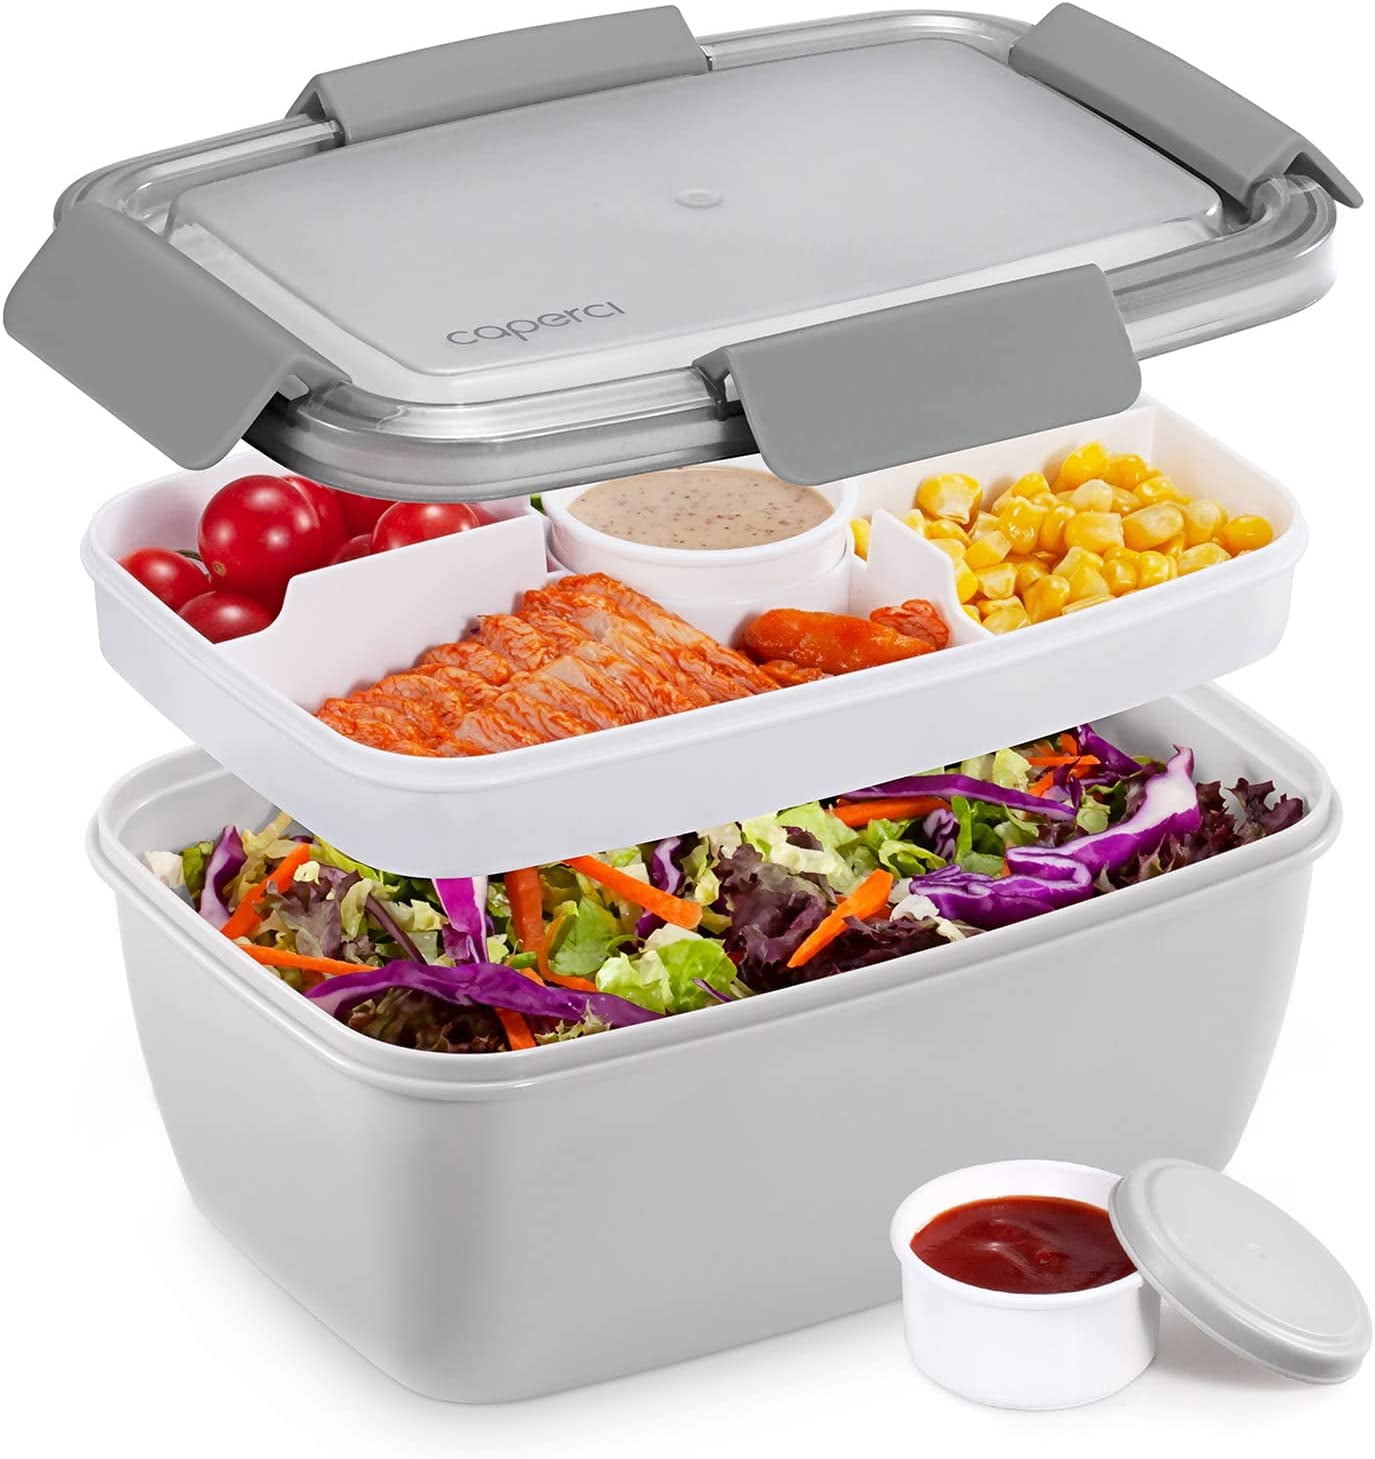 Tessco 6 Pcs Salad Container for Lunch 50 oz Salad Lunch Container with 3  Compartment Reusable Salad…See more Tessco 6 Pcs Salad Container for Lunch